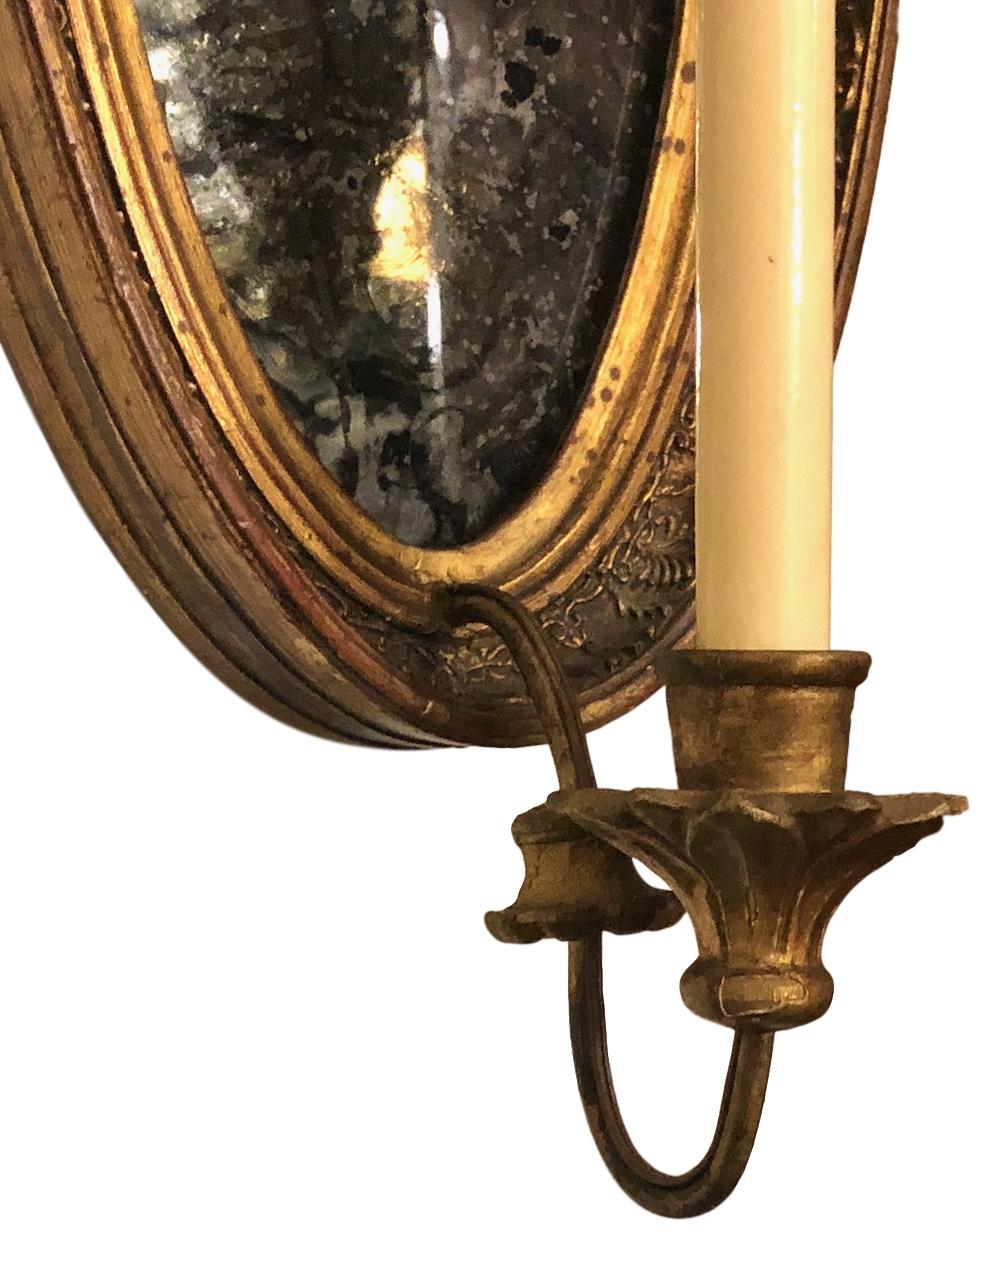 Pair of 1920s French carved and giltwood sconces with mirror backs.

Measurements:
Height 25.5?
Depth 9.5?
Width 9.5?.